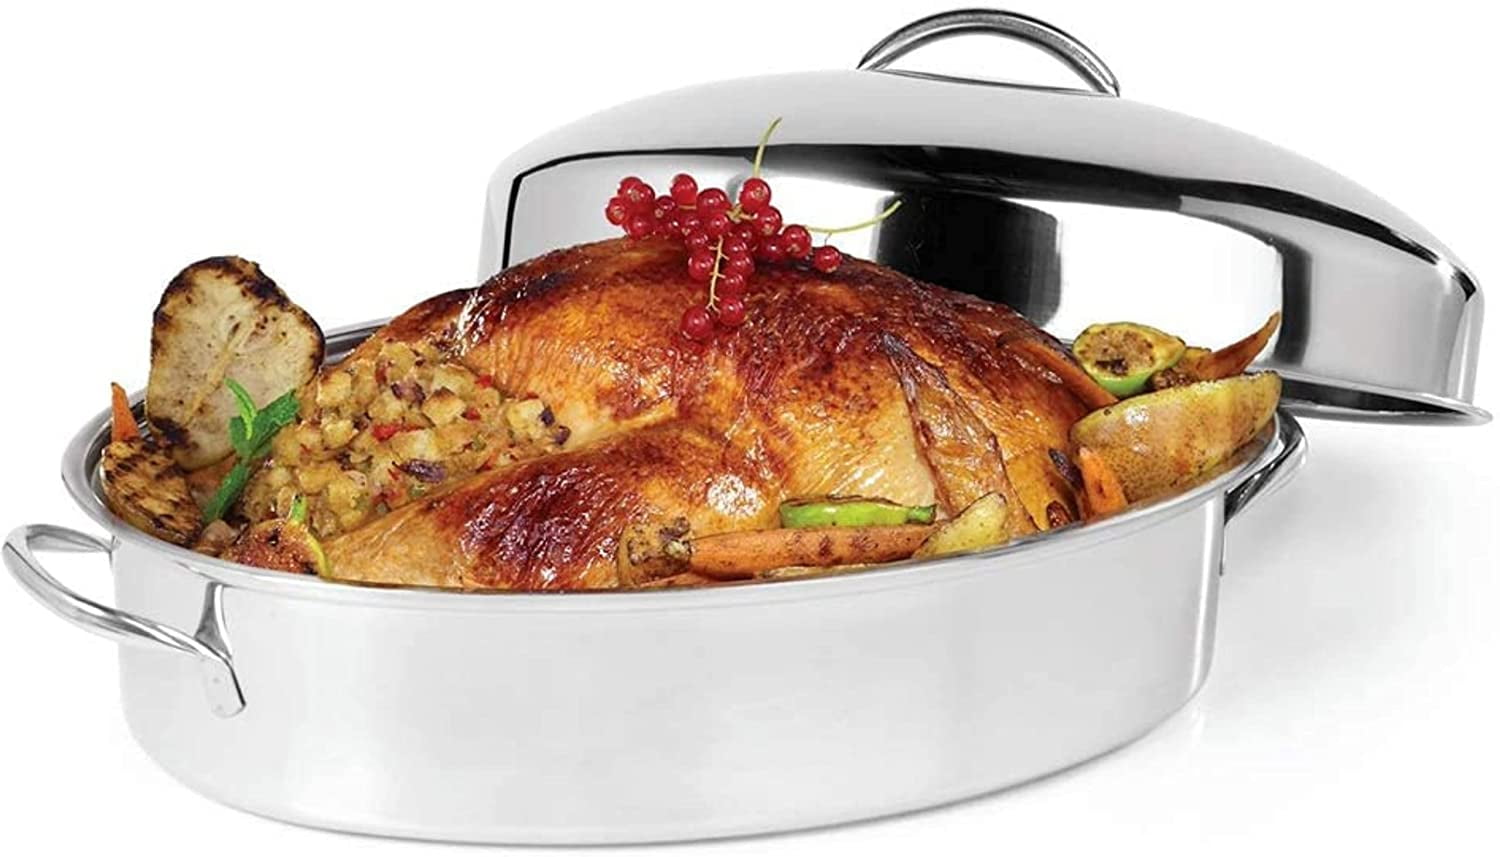 VANKUTL 16 inch Roasting Pan with Lid - Covered Oval Roaster - Enamel Carbon Steel Roaster Pot - Excellent Heat Distribution and Non-sticky - for Turk